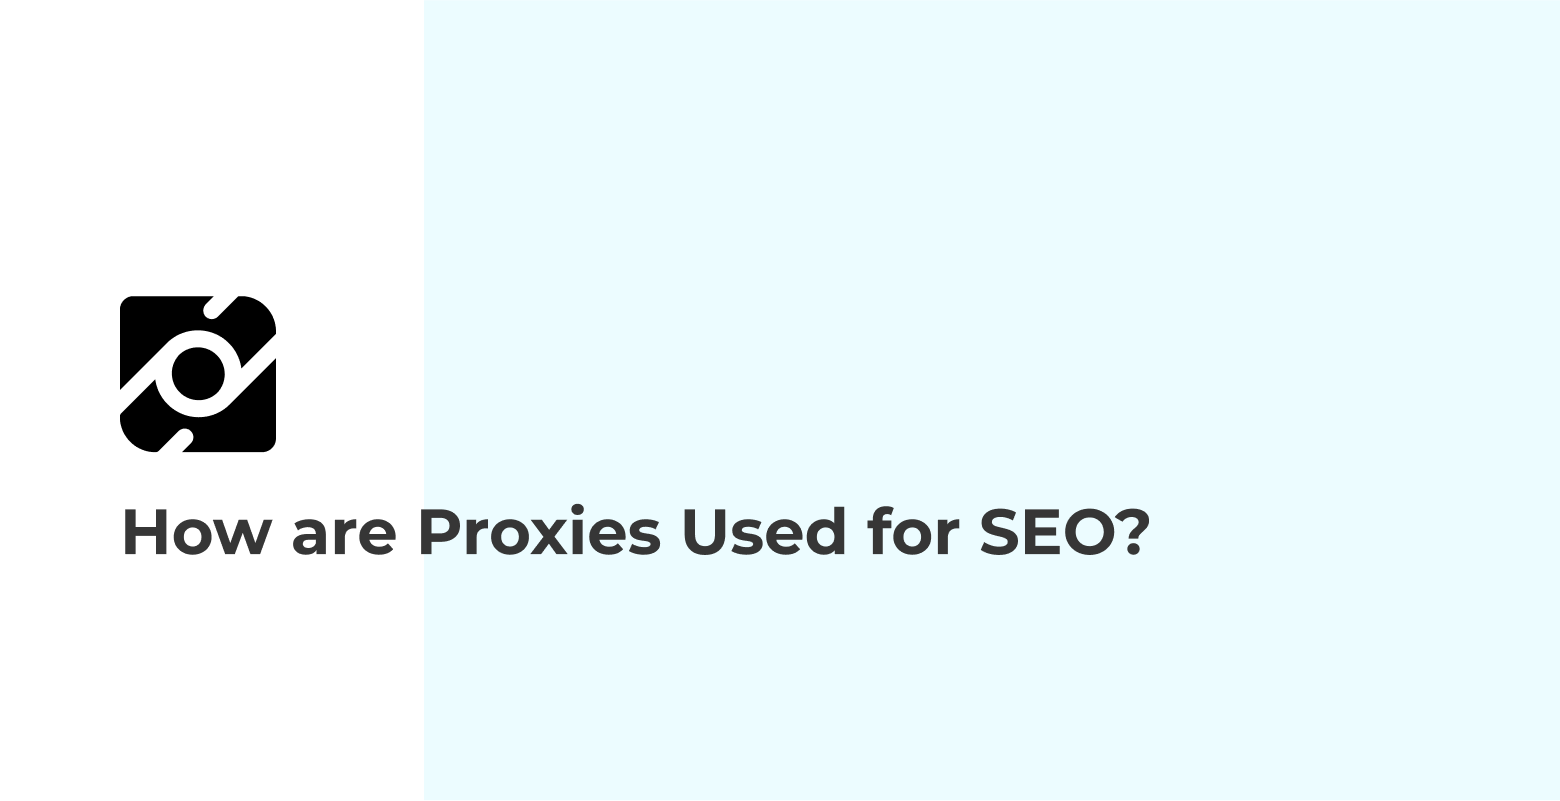 How are Proxies Used for SEO?